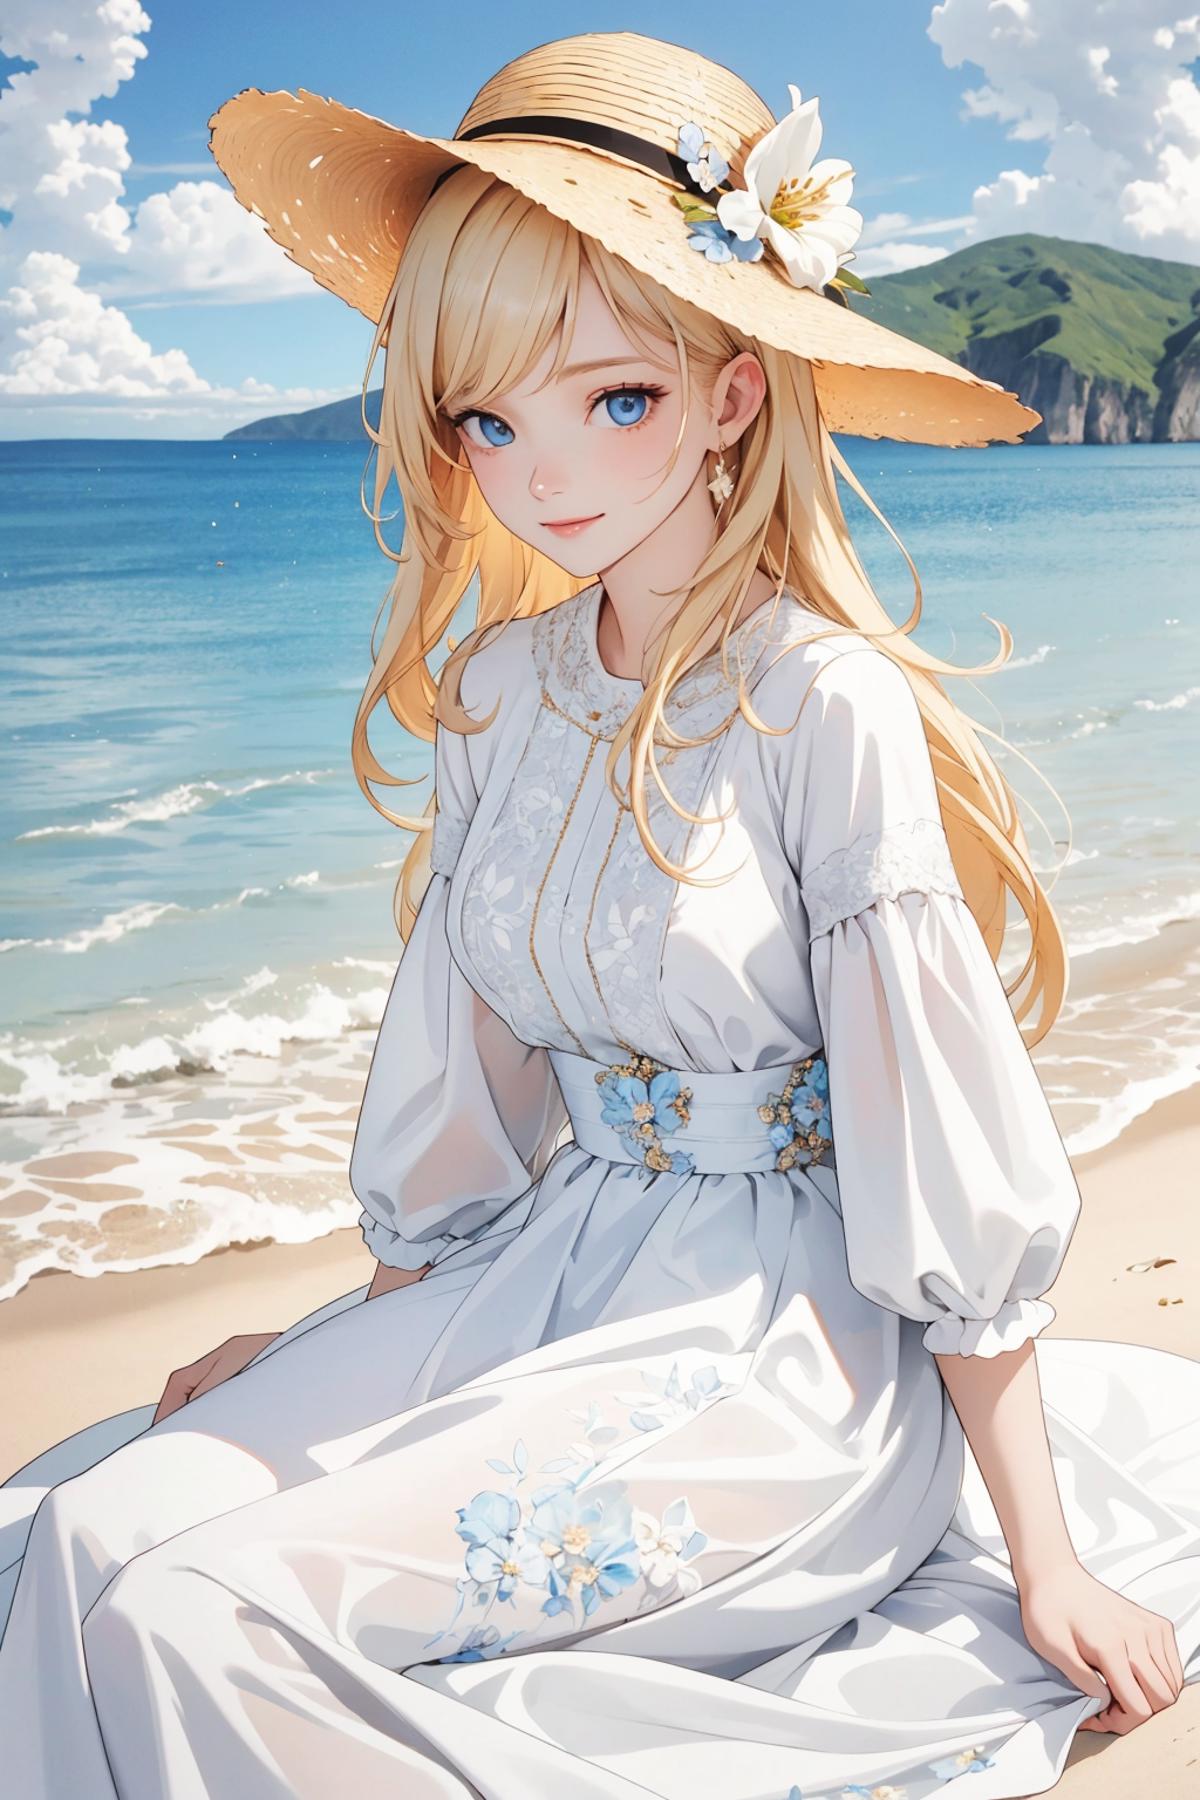 An anime girl with blonde hair and a blue hat sitting on a beach.